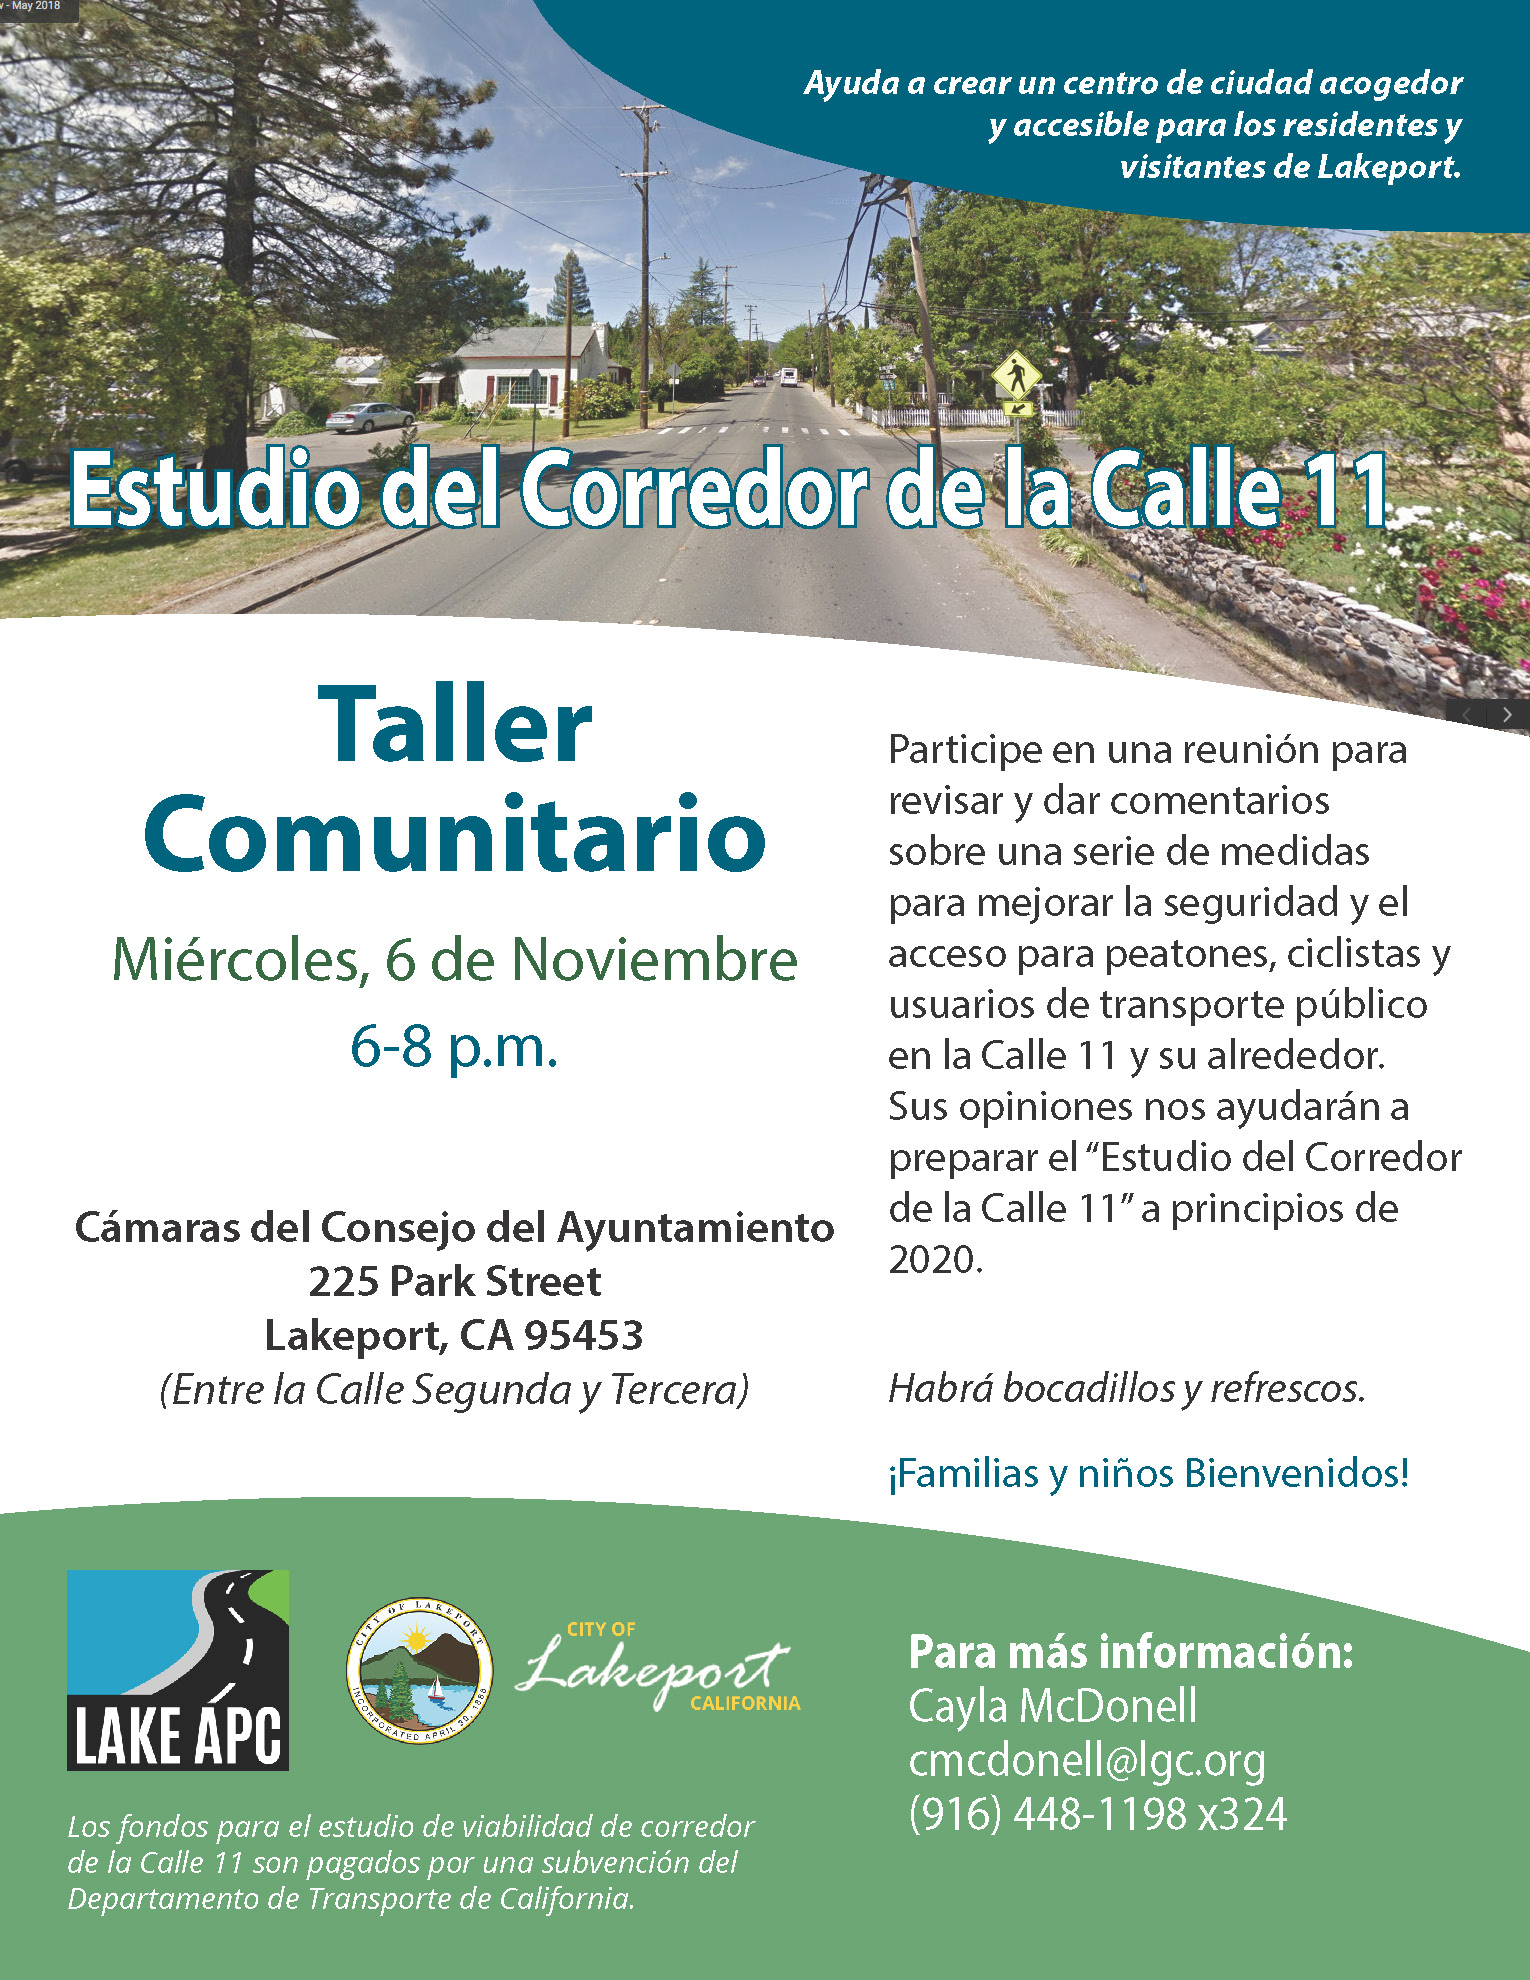 Picture of the flyer for the community workshop in Spanish